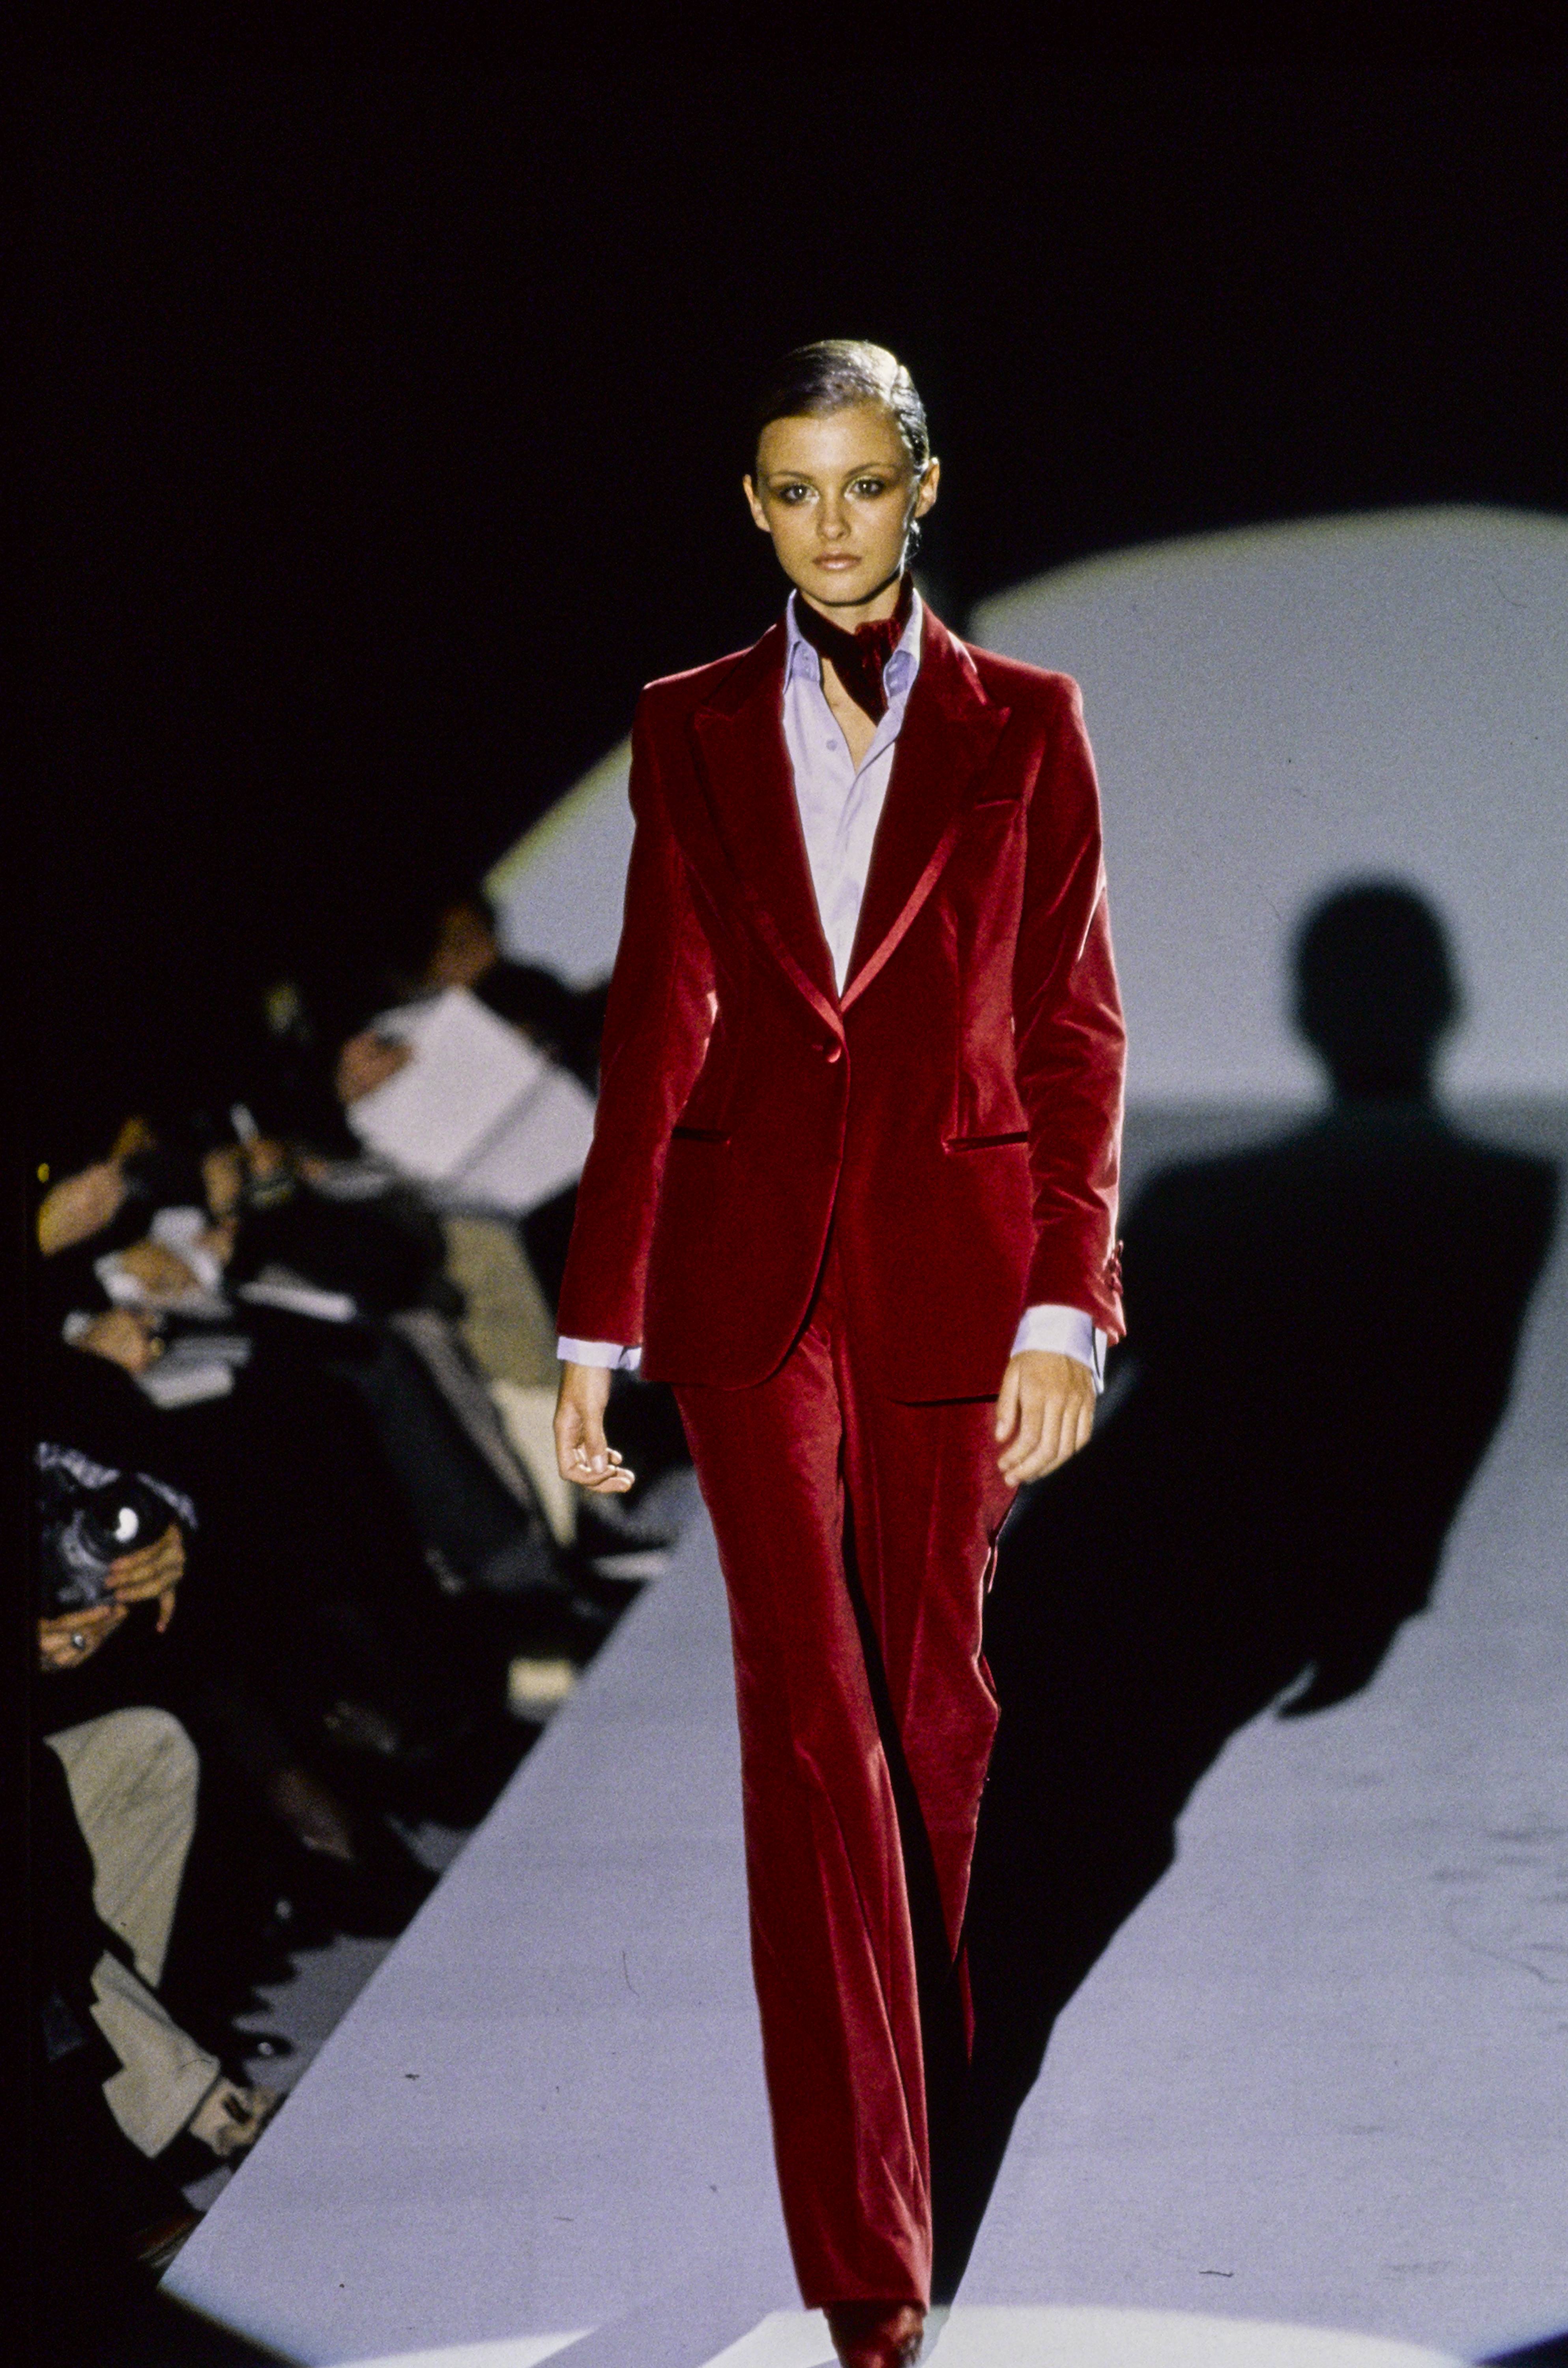 nss 90s: the most epic catwalks of those years